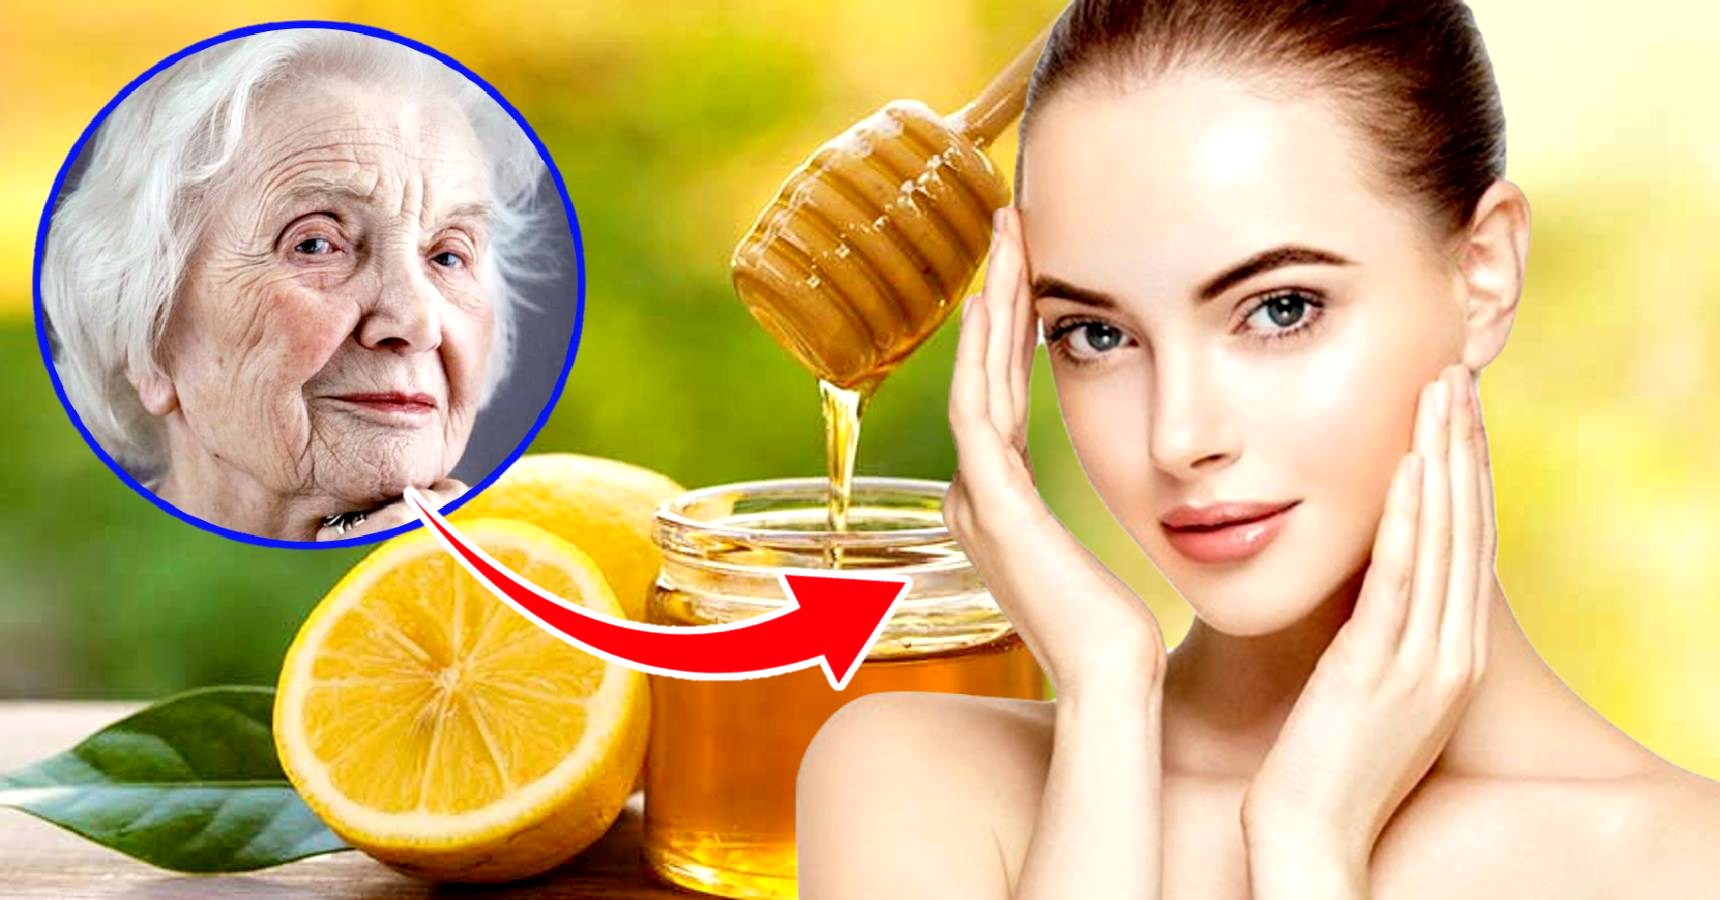 8 Best Home Remedies for Wrinkles